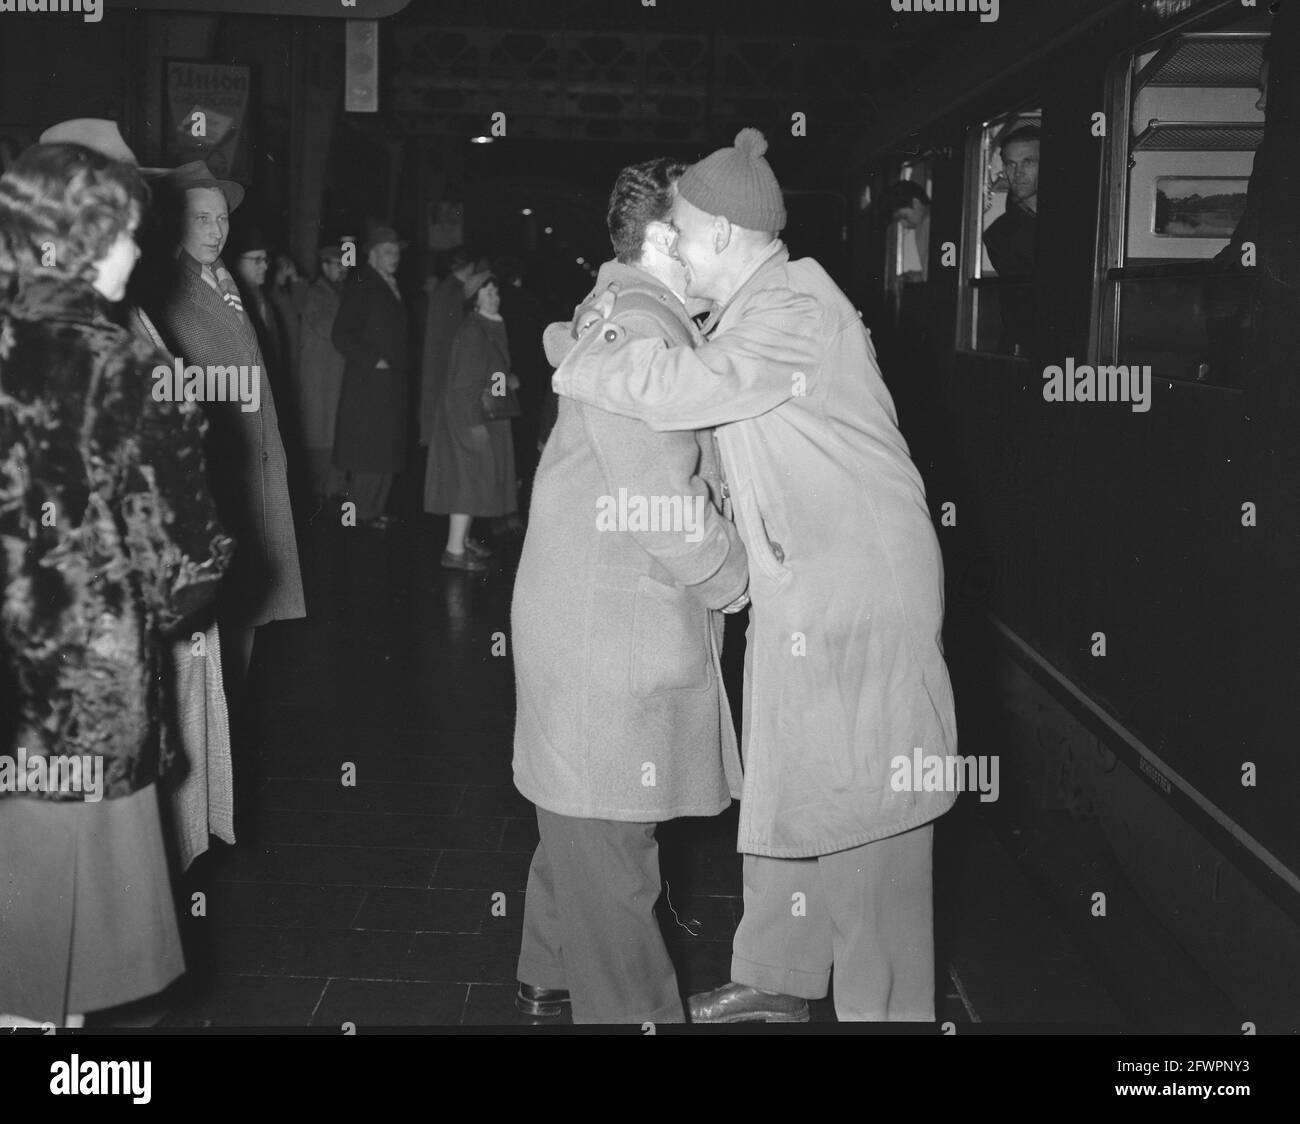 Arrival of third group of Hungarian refugees, November 25, 1956, ARRIVAL, FLIGHTS, The Netherlands, 20th century press agency photo, news to remember, documentary, historic photography 1945-1990, visual stories, human history of the Twentieth Century, capturing moments in time Stock Photo